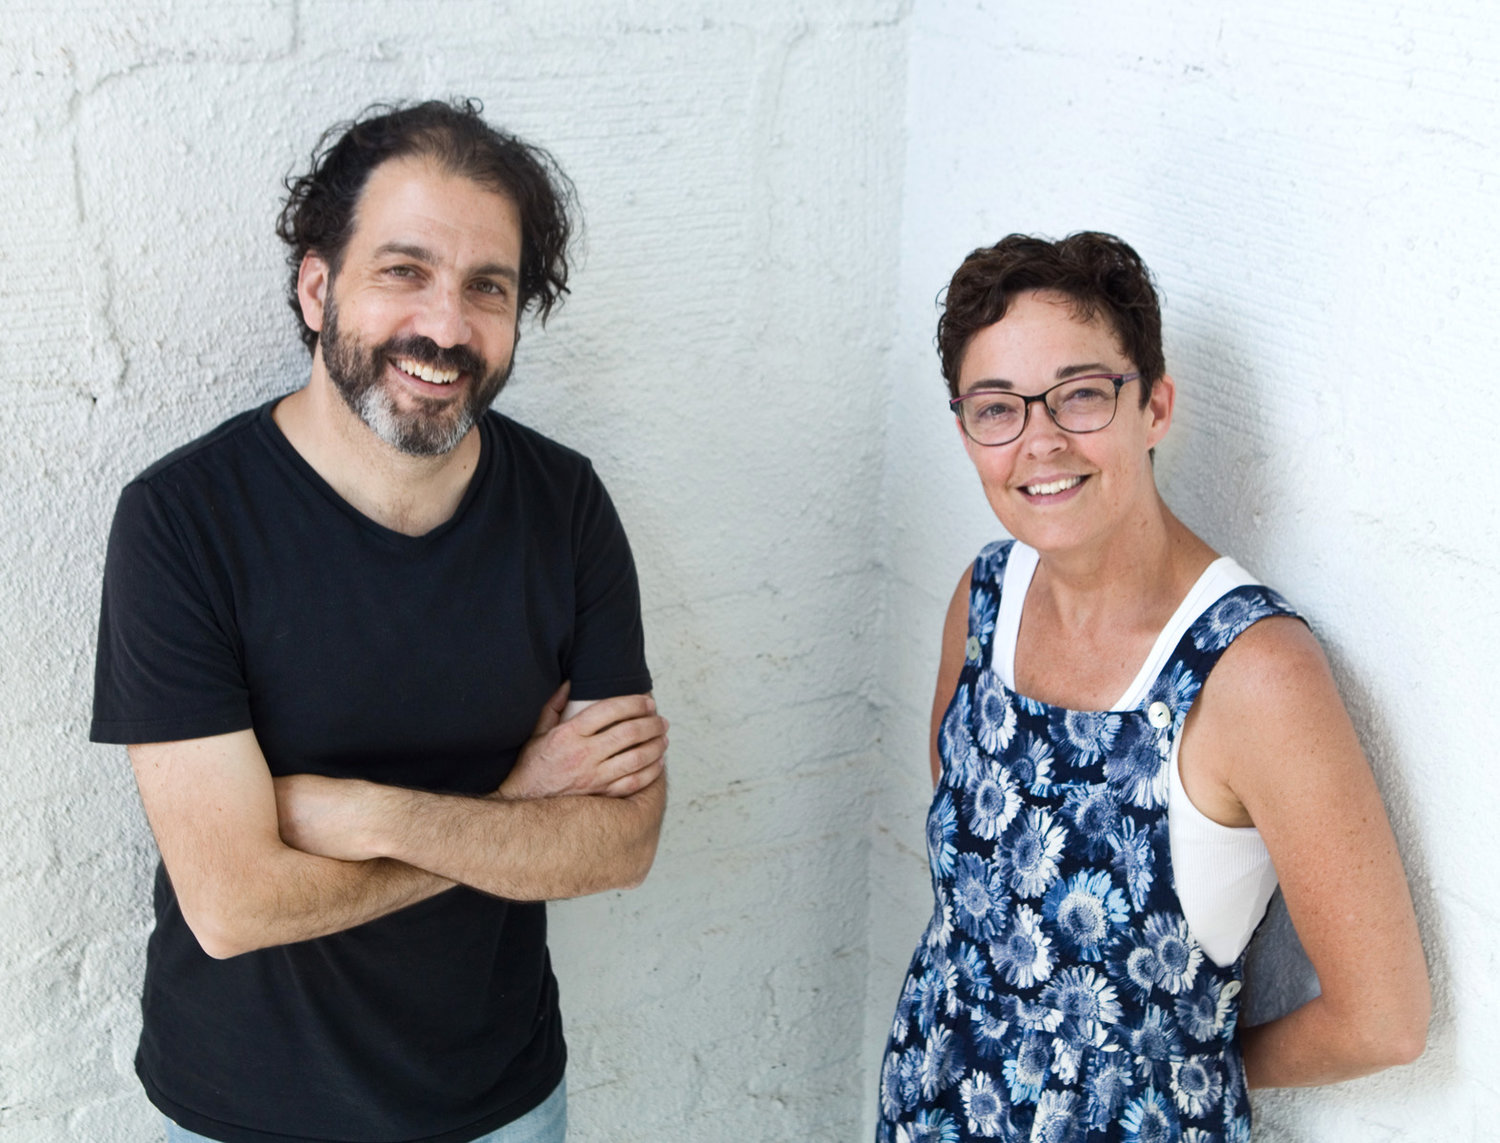 Alan Berks (left) and Leah Cooper (right) are co-artistic directors of Wonderlust Productions. Their 2016 play about the experience of adoption has been adapted into graphic novel form. (Photo by Margie O’Loughlin)